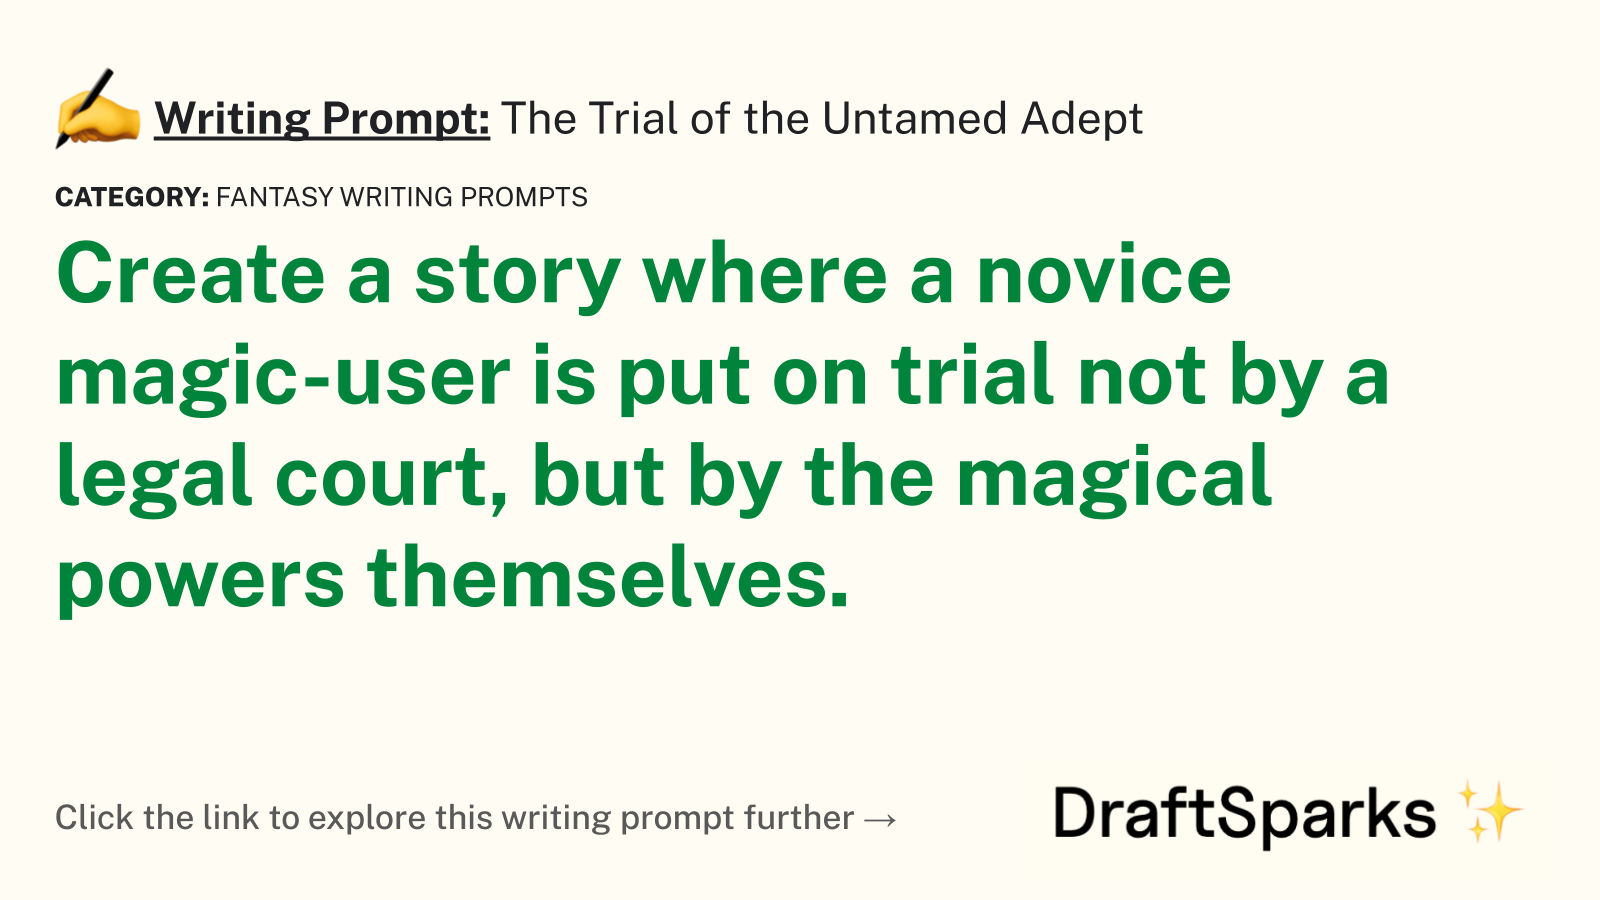 The Trial of the Untamed Adept